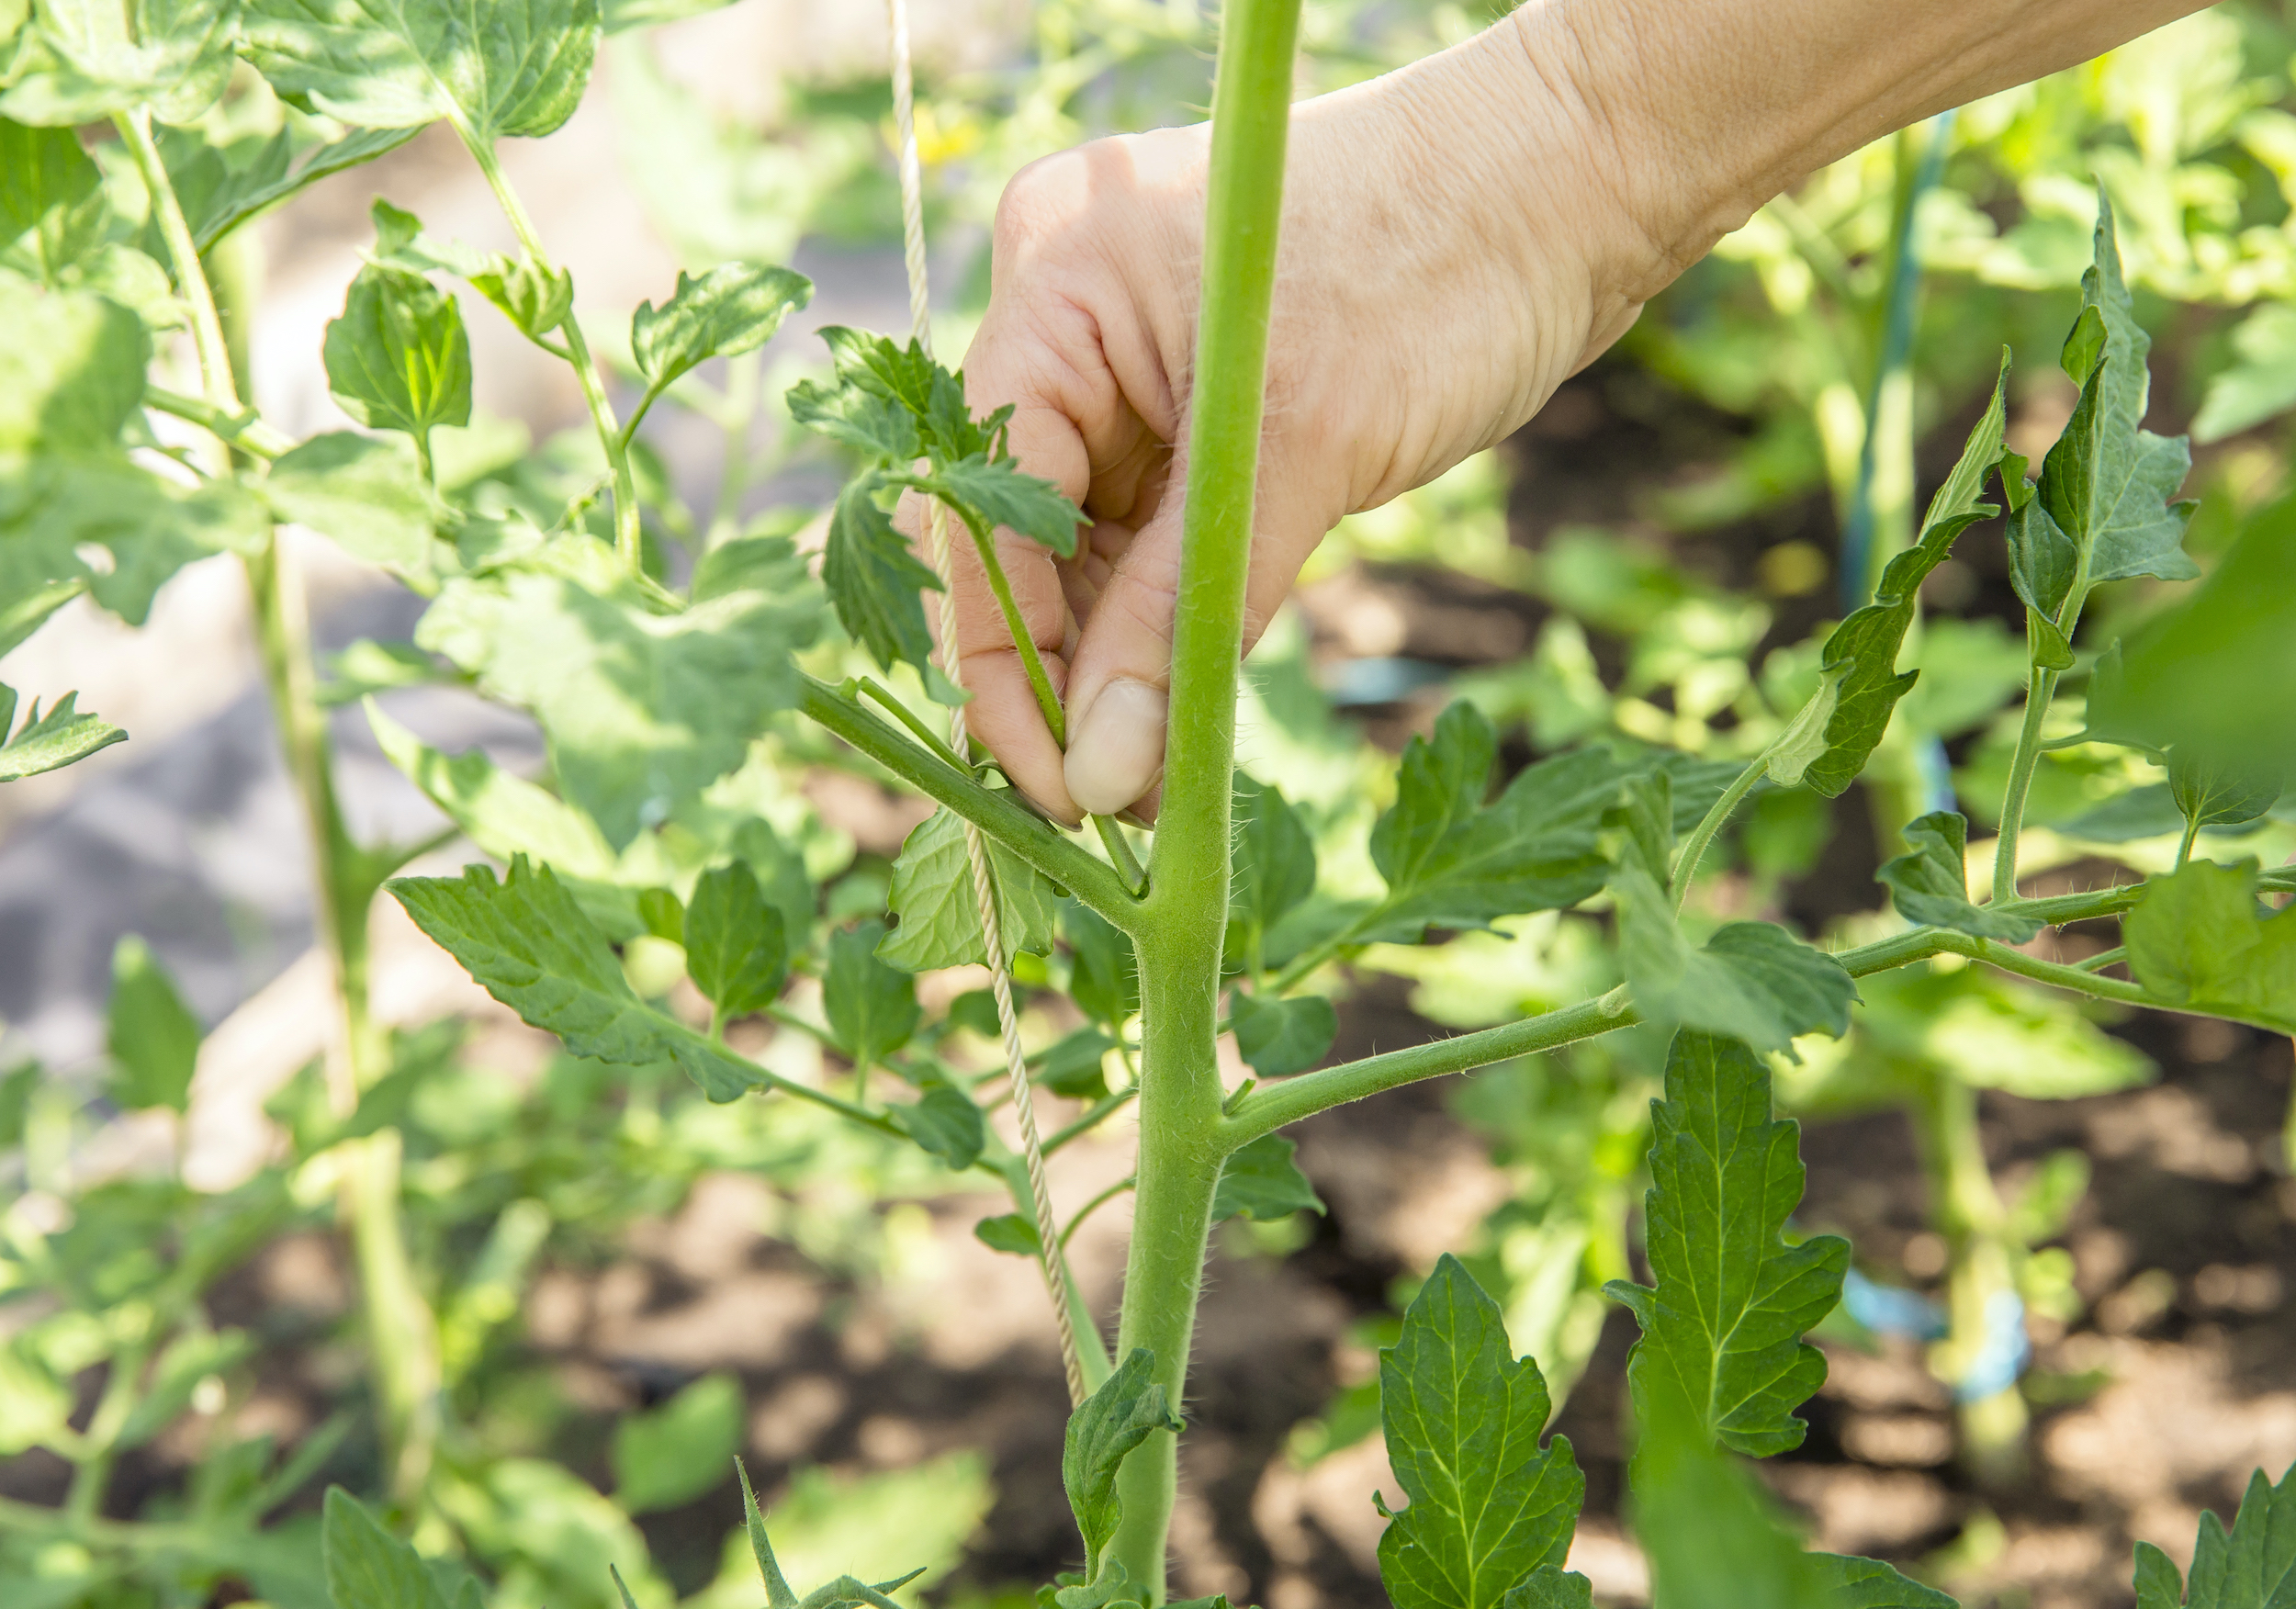 Pruning Vegetable Plants:  Why, When, & How To Prune Vegetables